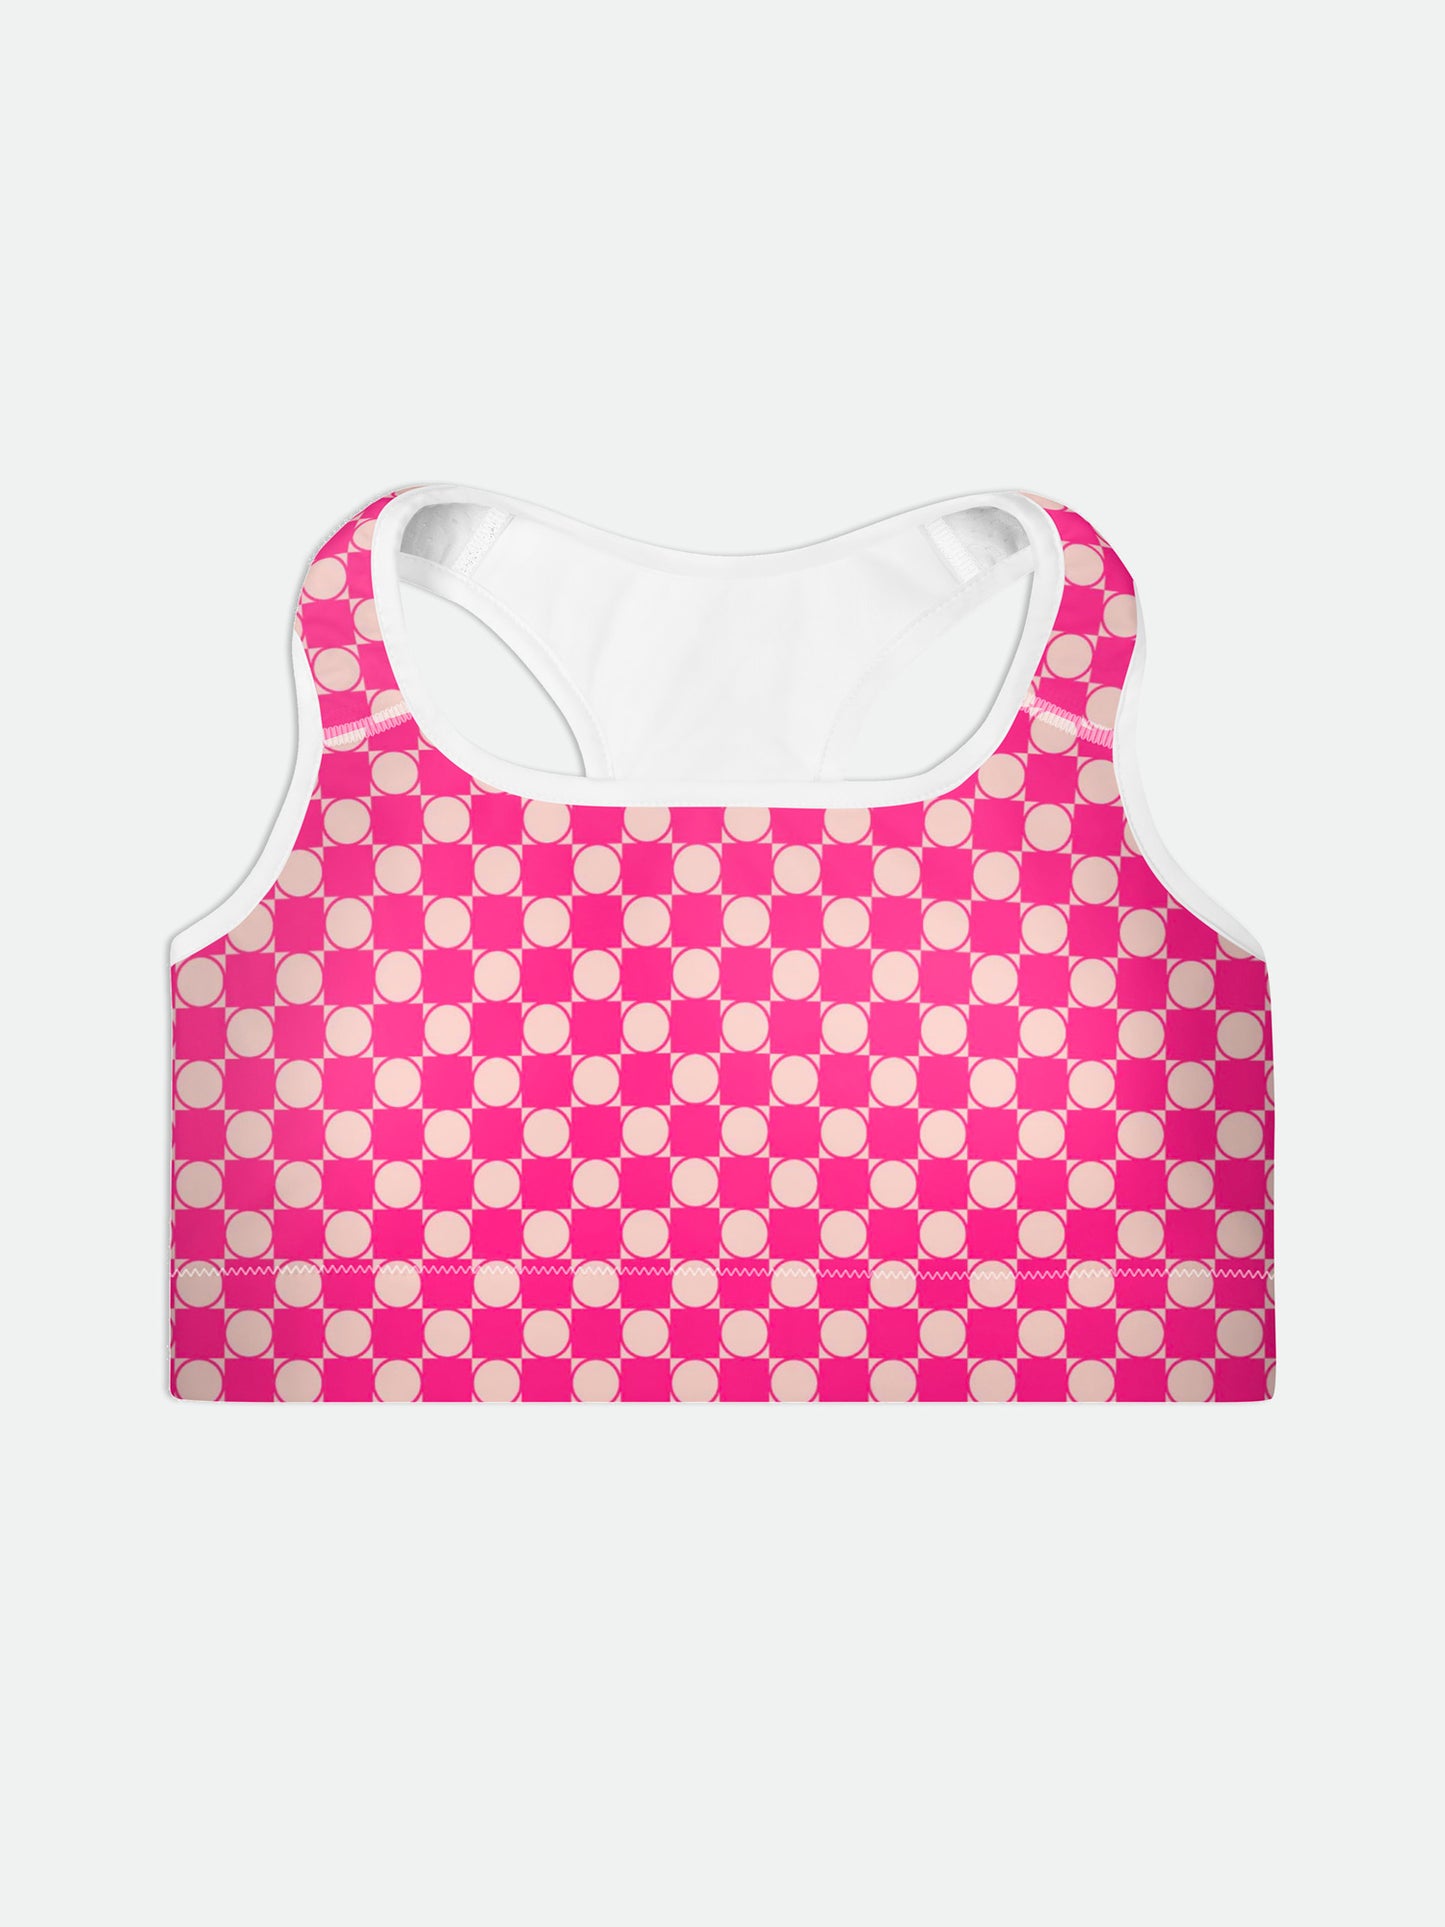 Checkered Padded Sports Bra in PInks